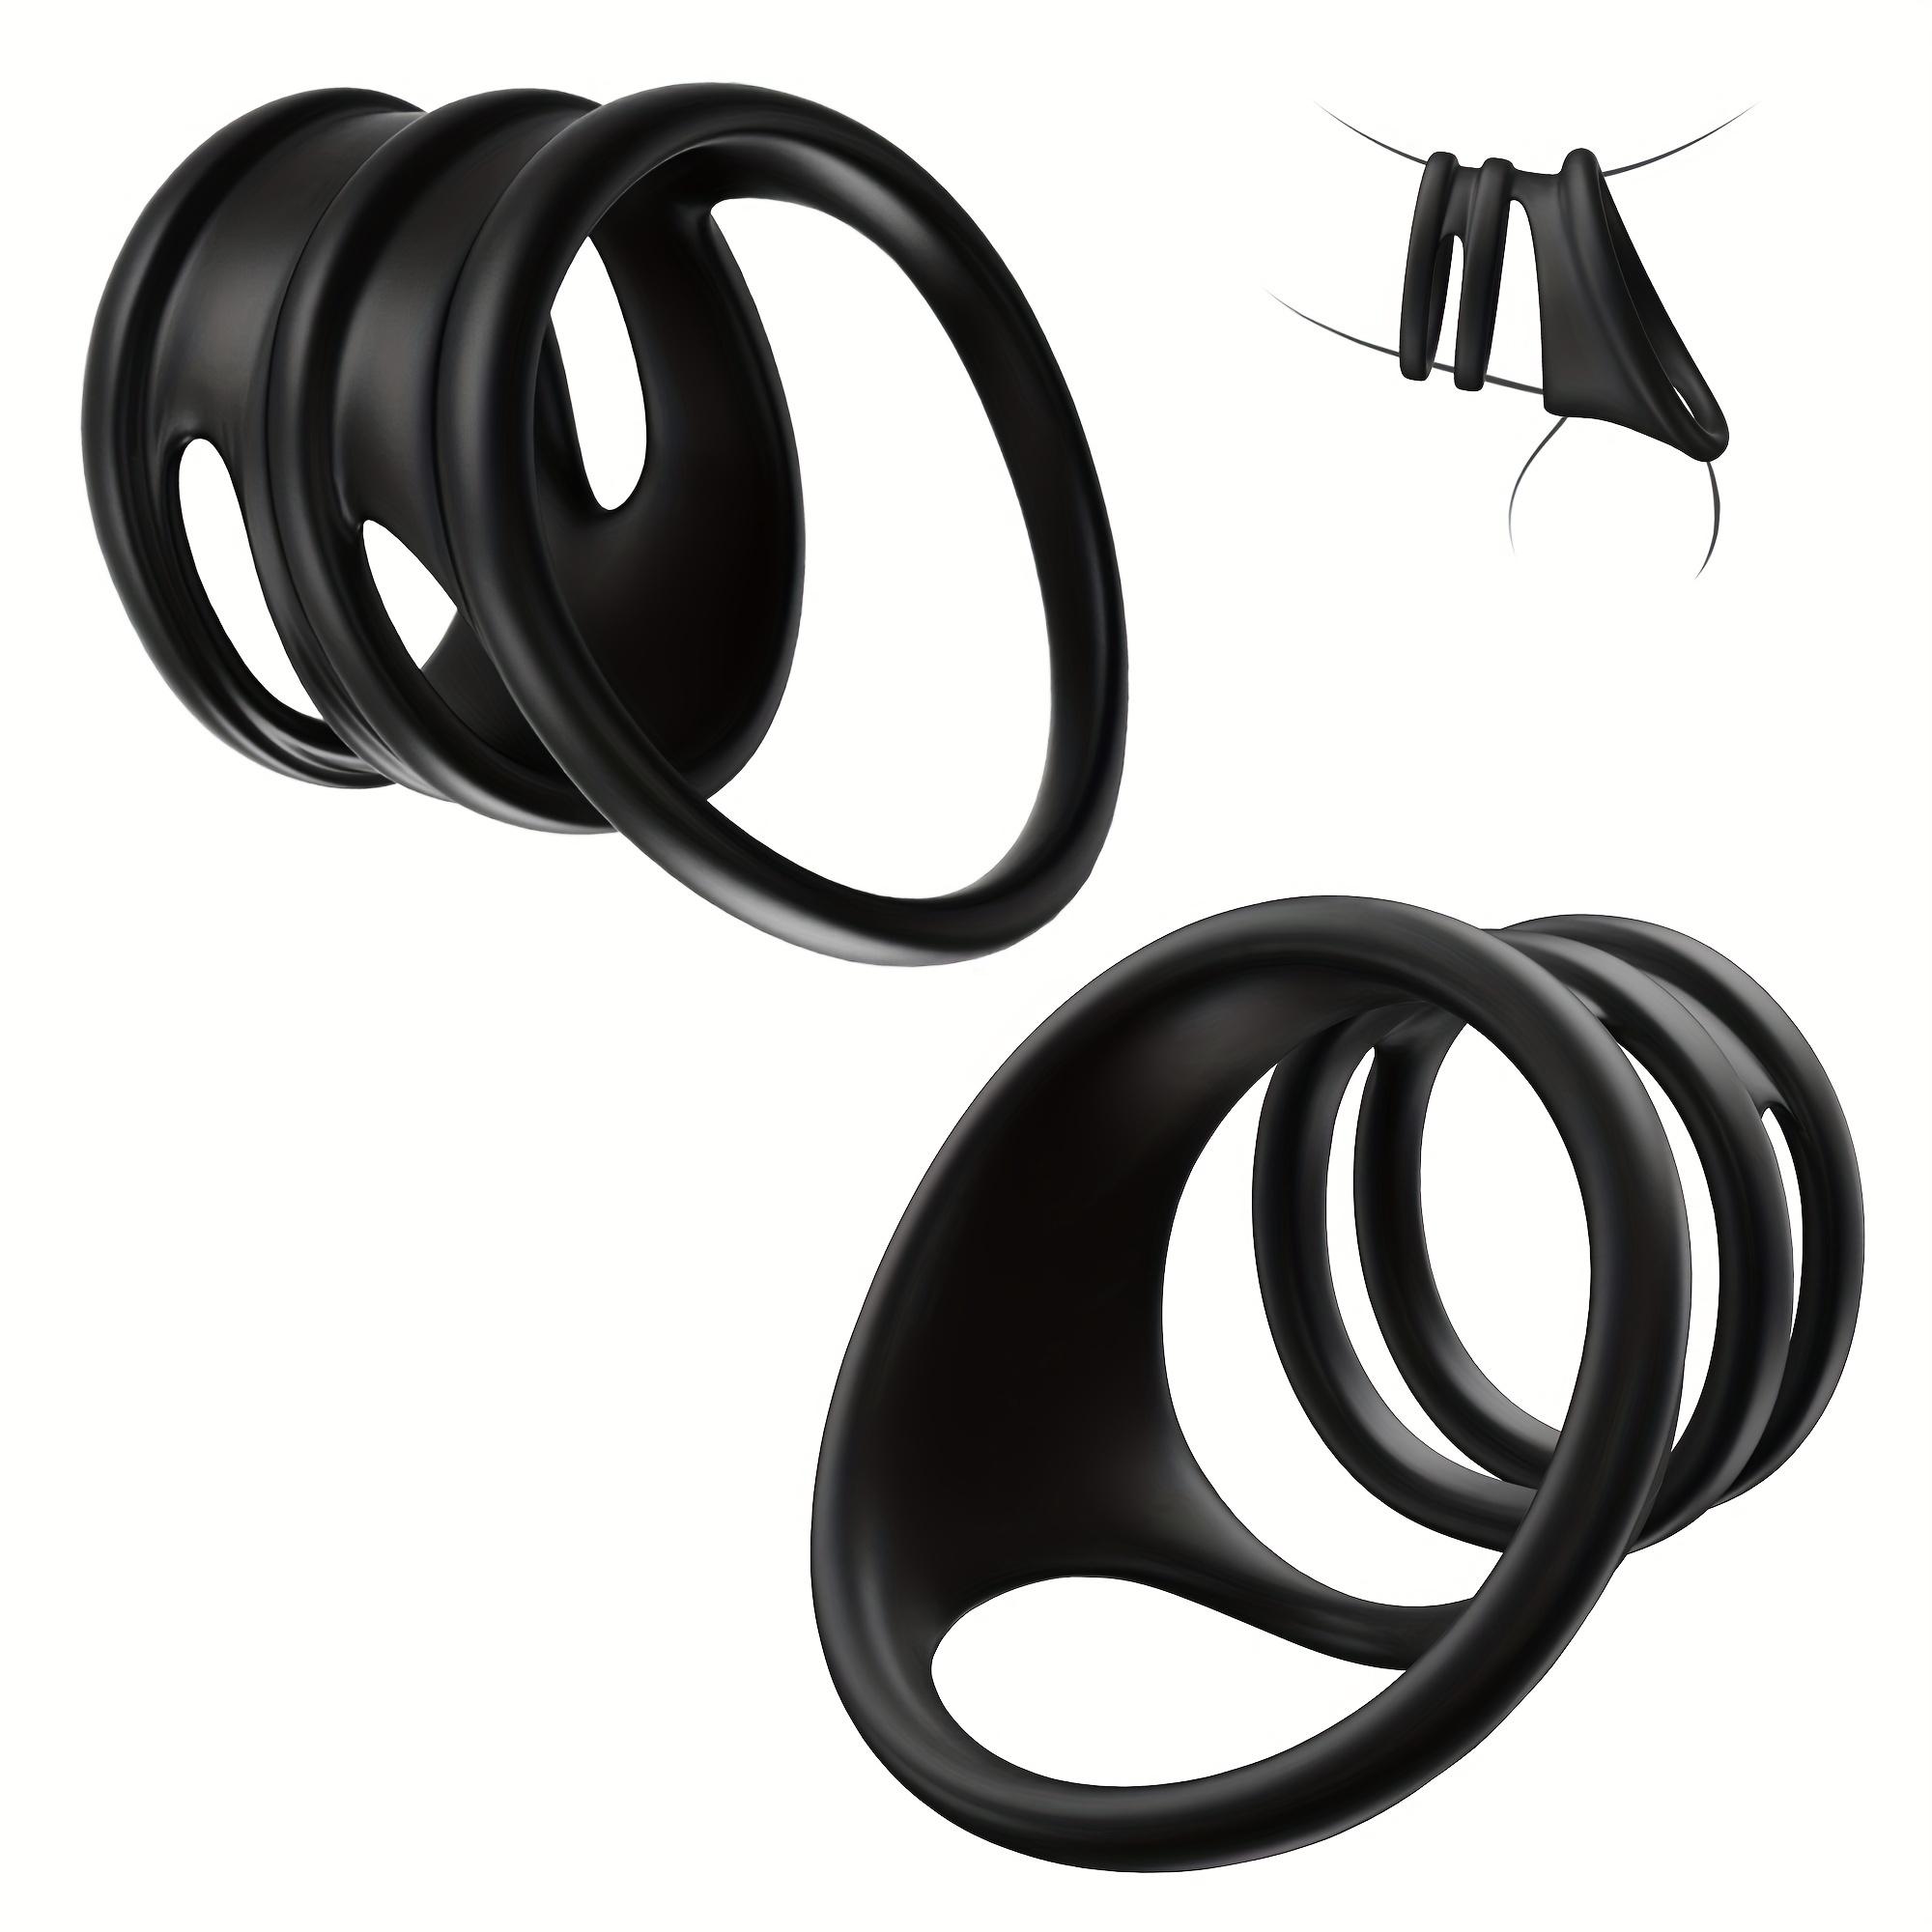  Premium Quality Silicone Penis Rings Ultra Soft Stretchy Men&#39;s Cock Ring Longer Stronger Erection Cock Ring For Male Sex Toy